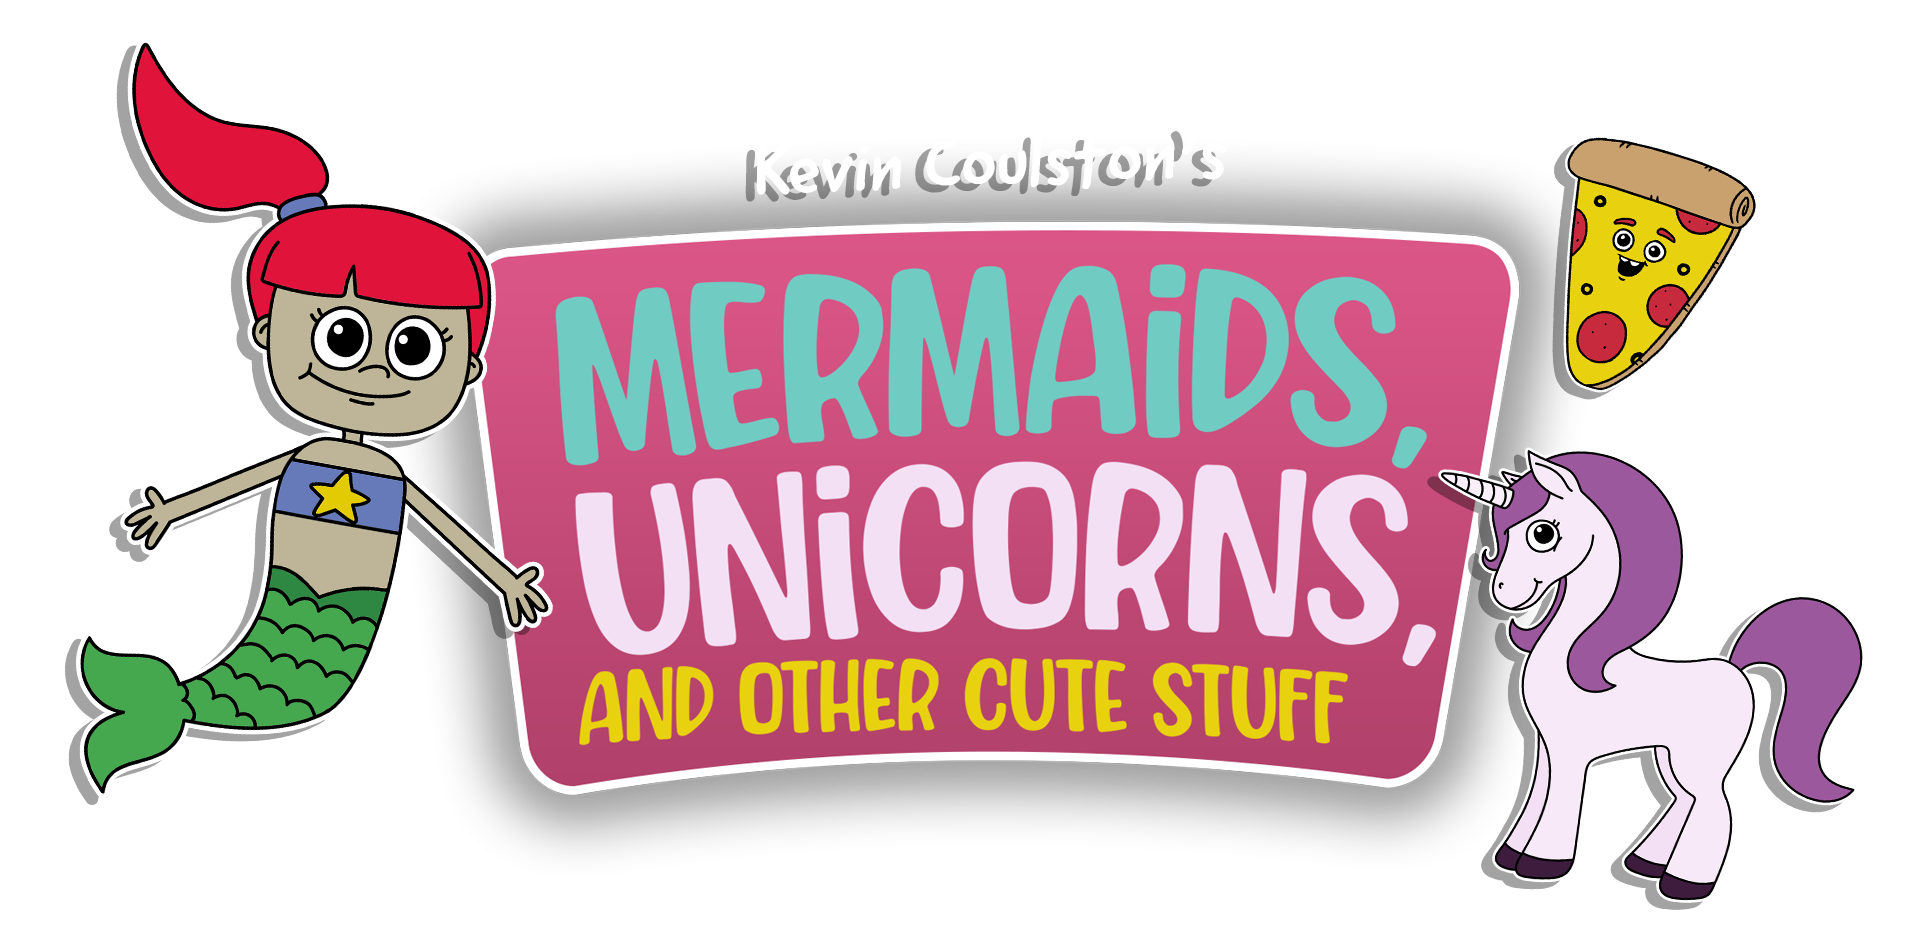 Kevin Coulston's Mermaids, Unicorns, and Other Cute Stuff Logo